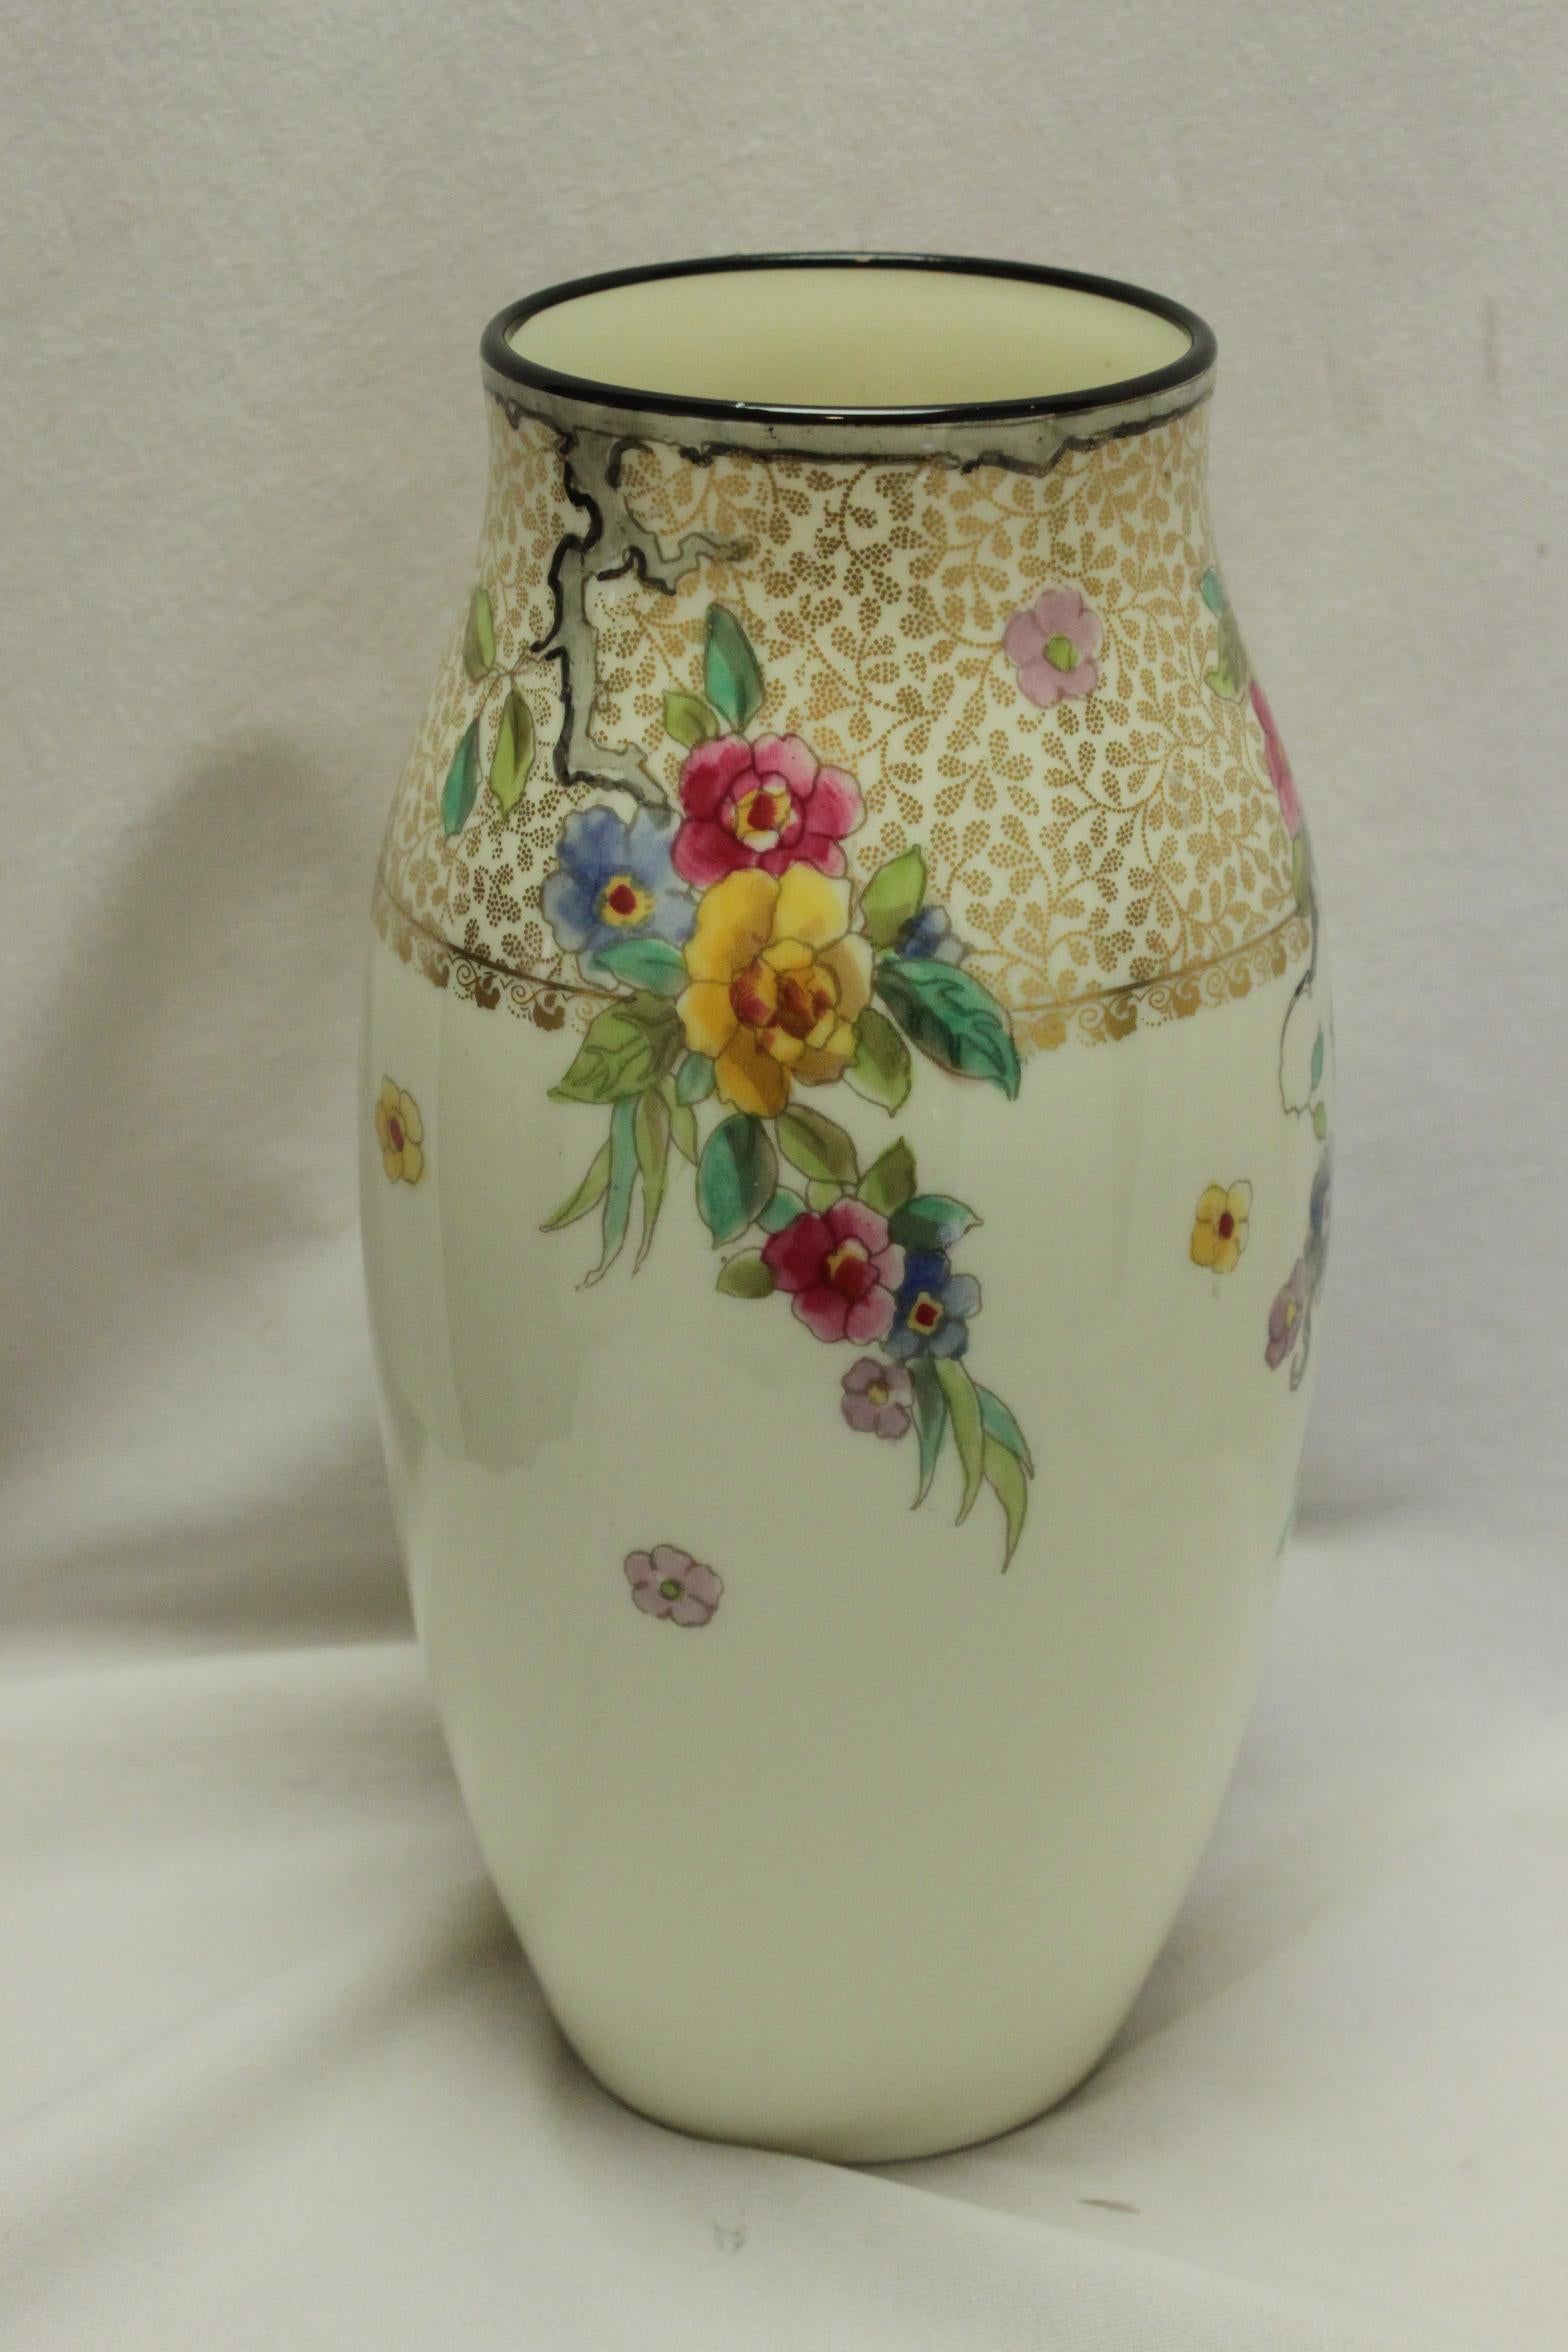 This very pretty Royal Doulton porcelain vase is decorated with a band of gilt filigree to the top, from which three hanging boughs of hand coloured flowers descend down the creamy porcelain body. There are also a number of hand coloured blossoms